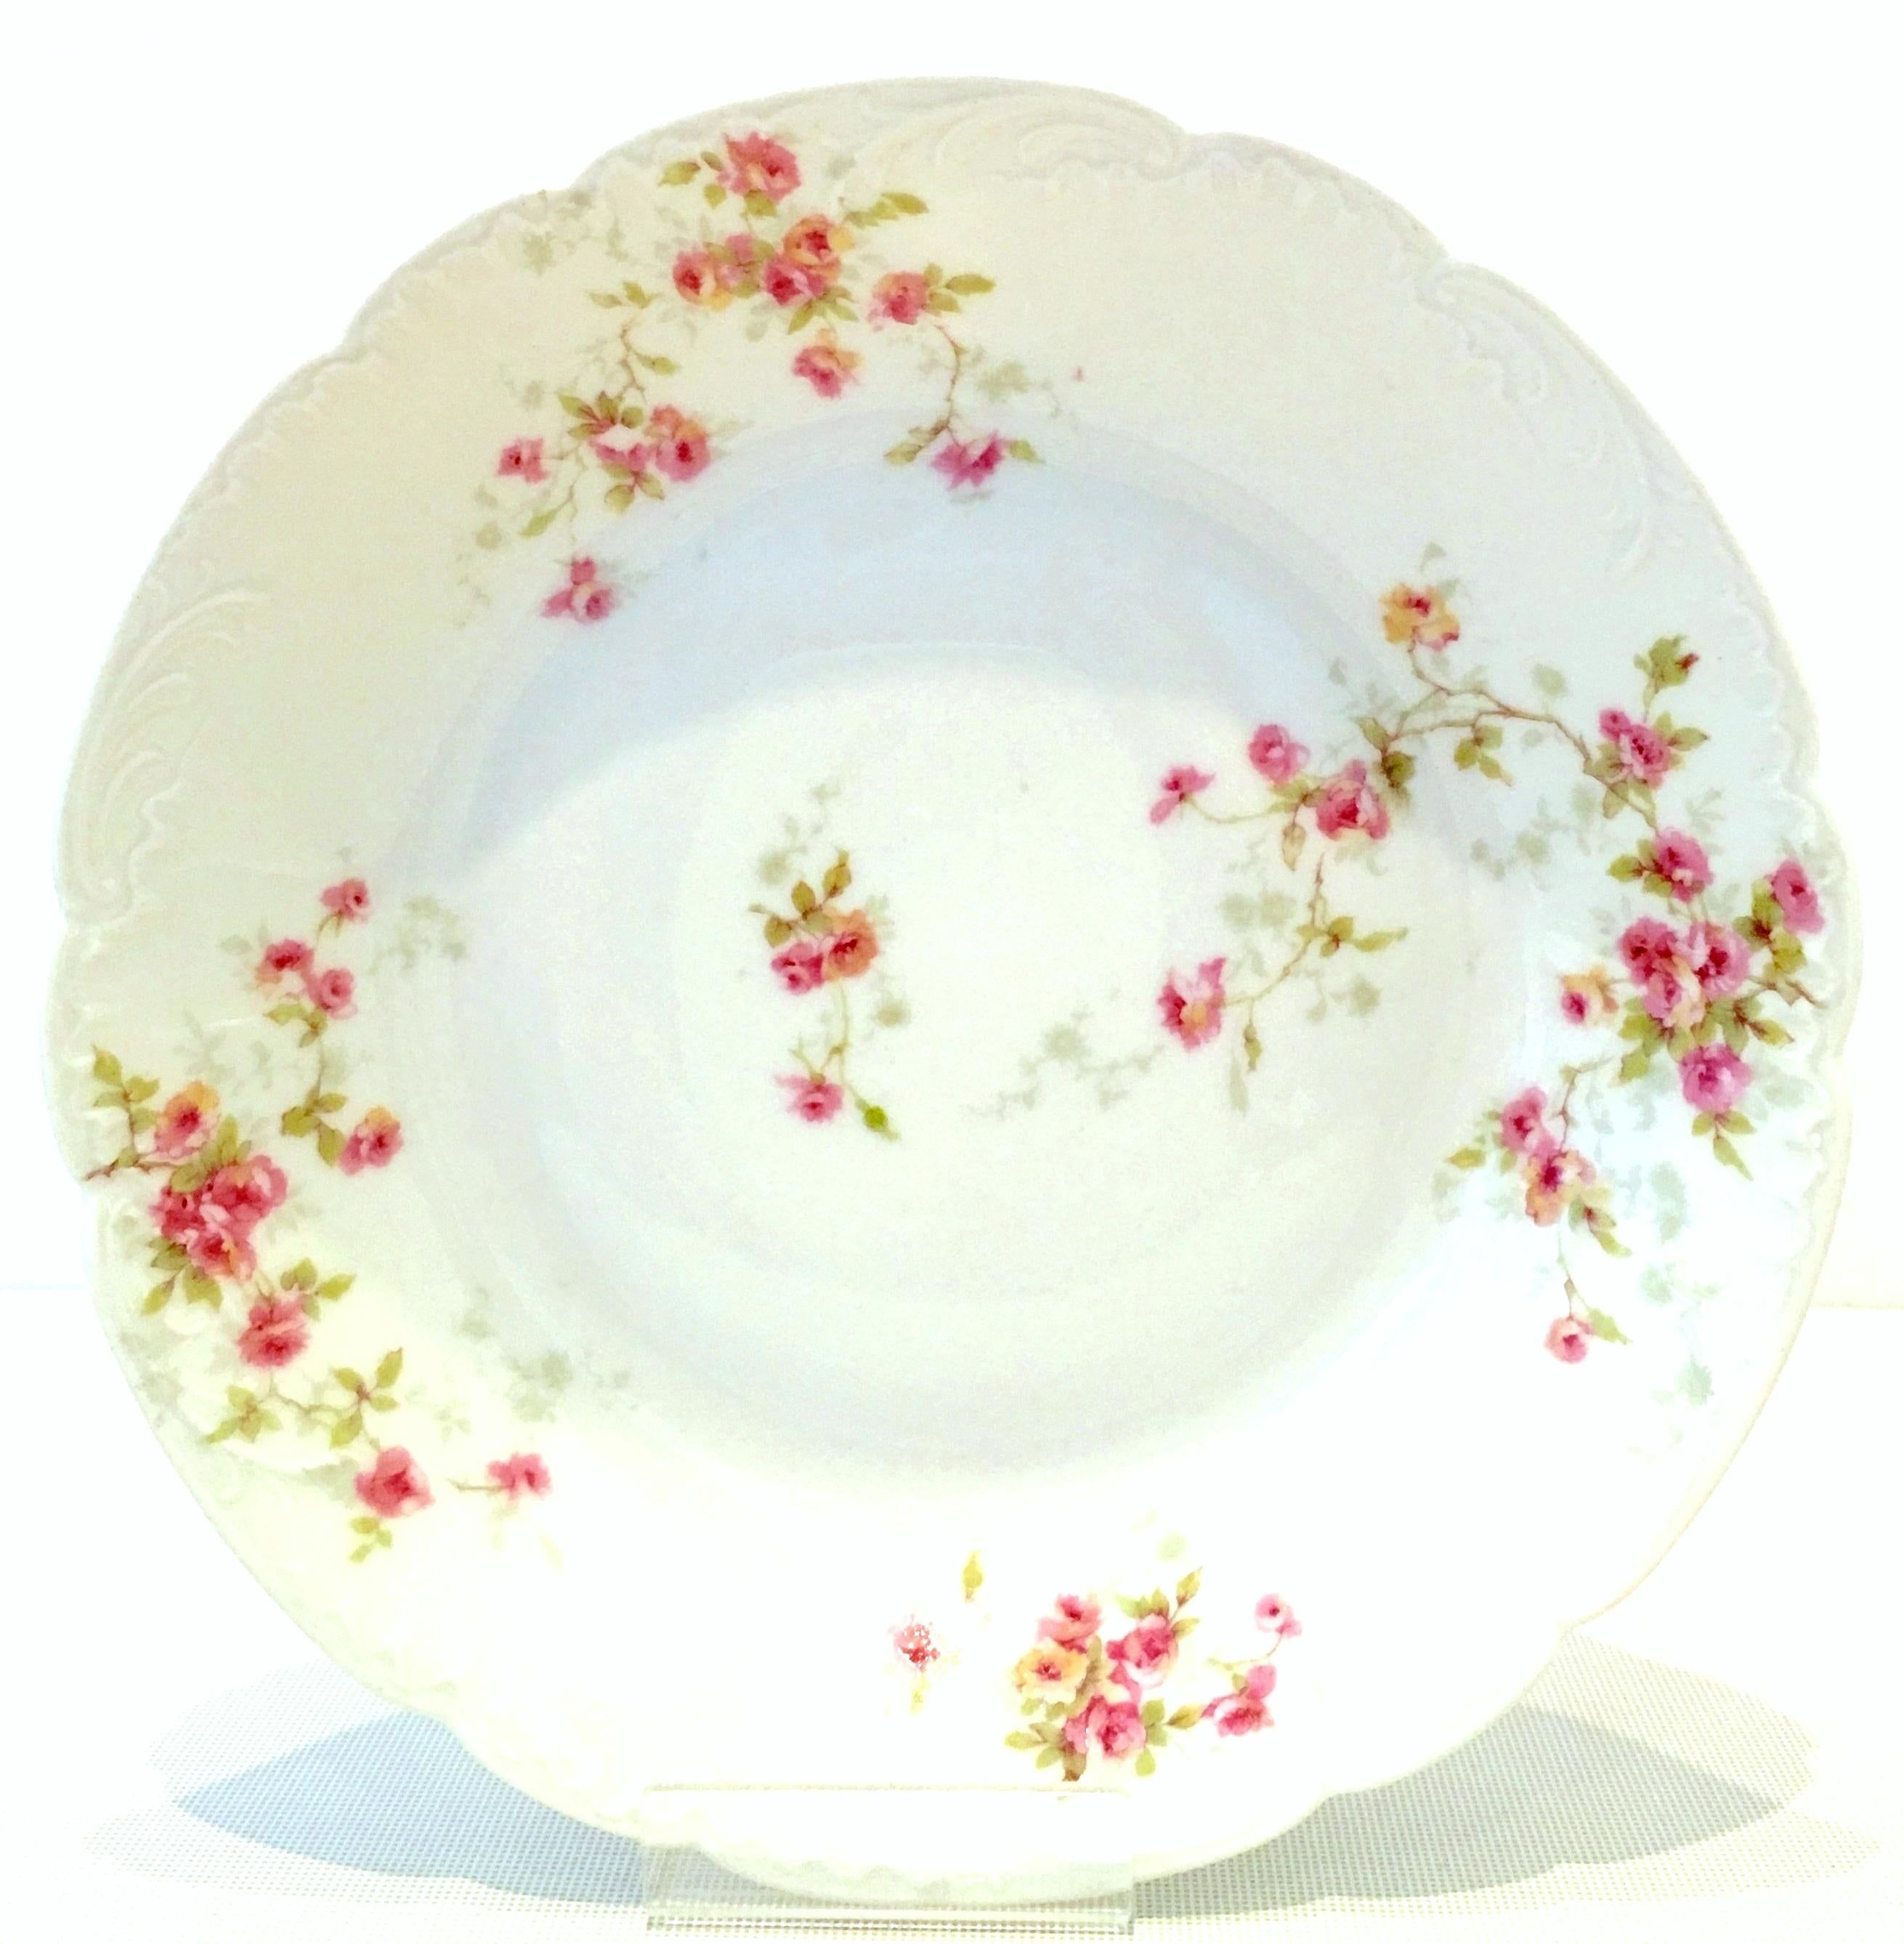 20th Century French Limoges dinnerware set of seven pieces by, Theodore Haviland. Set features a bright white ground with scalloped shape detail, hand painted in a bright pink and green flowing rose pattern. Set includes four coupe soup bowls and